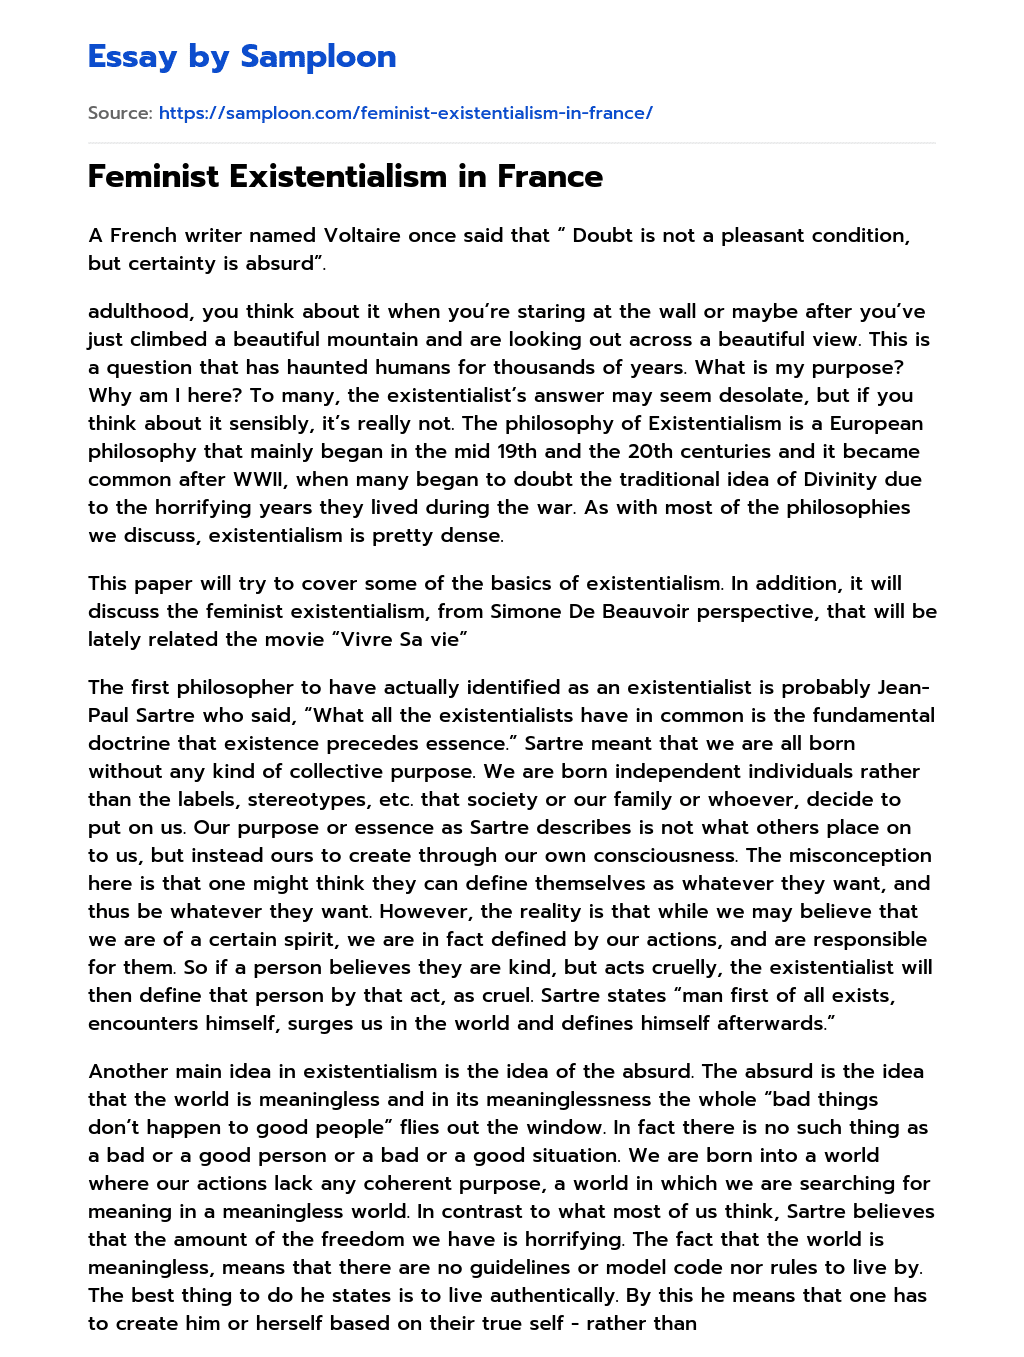 Feminist Existentialism in France essay